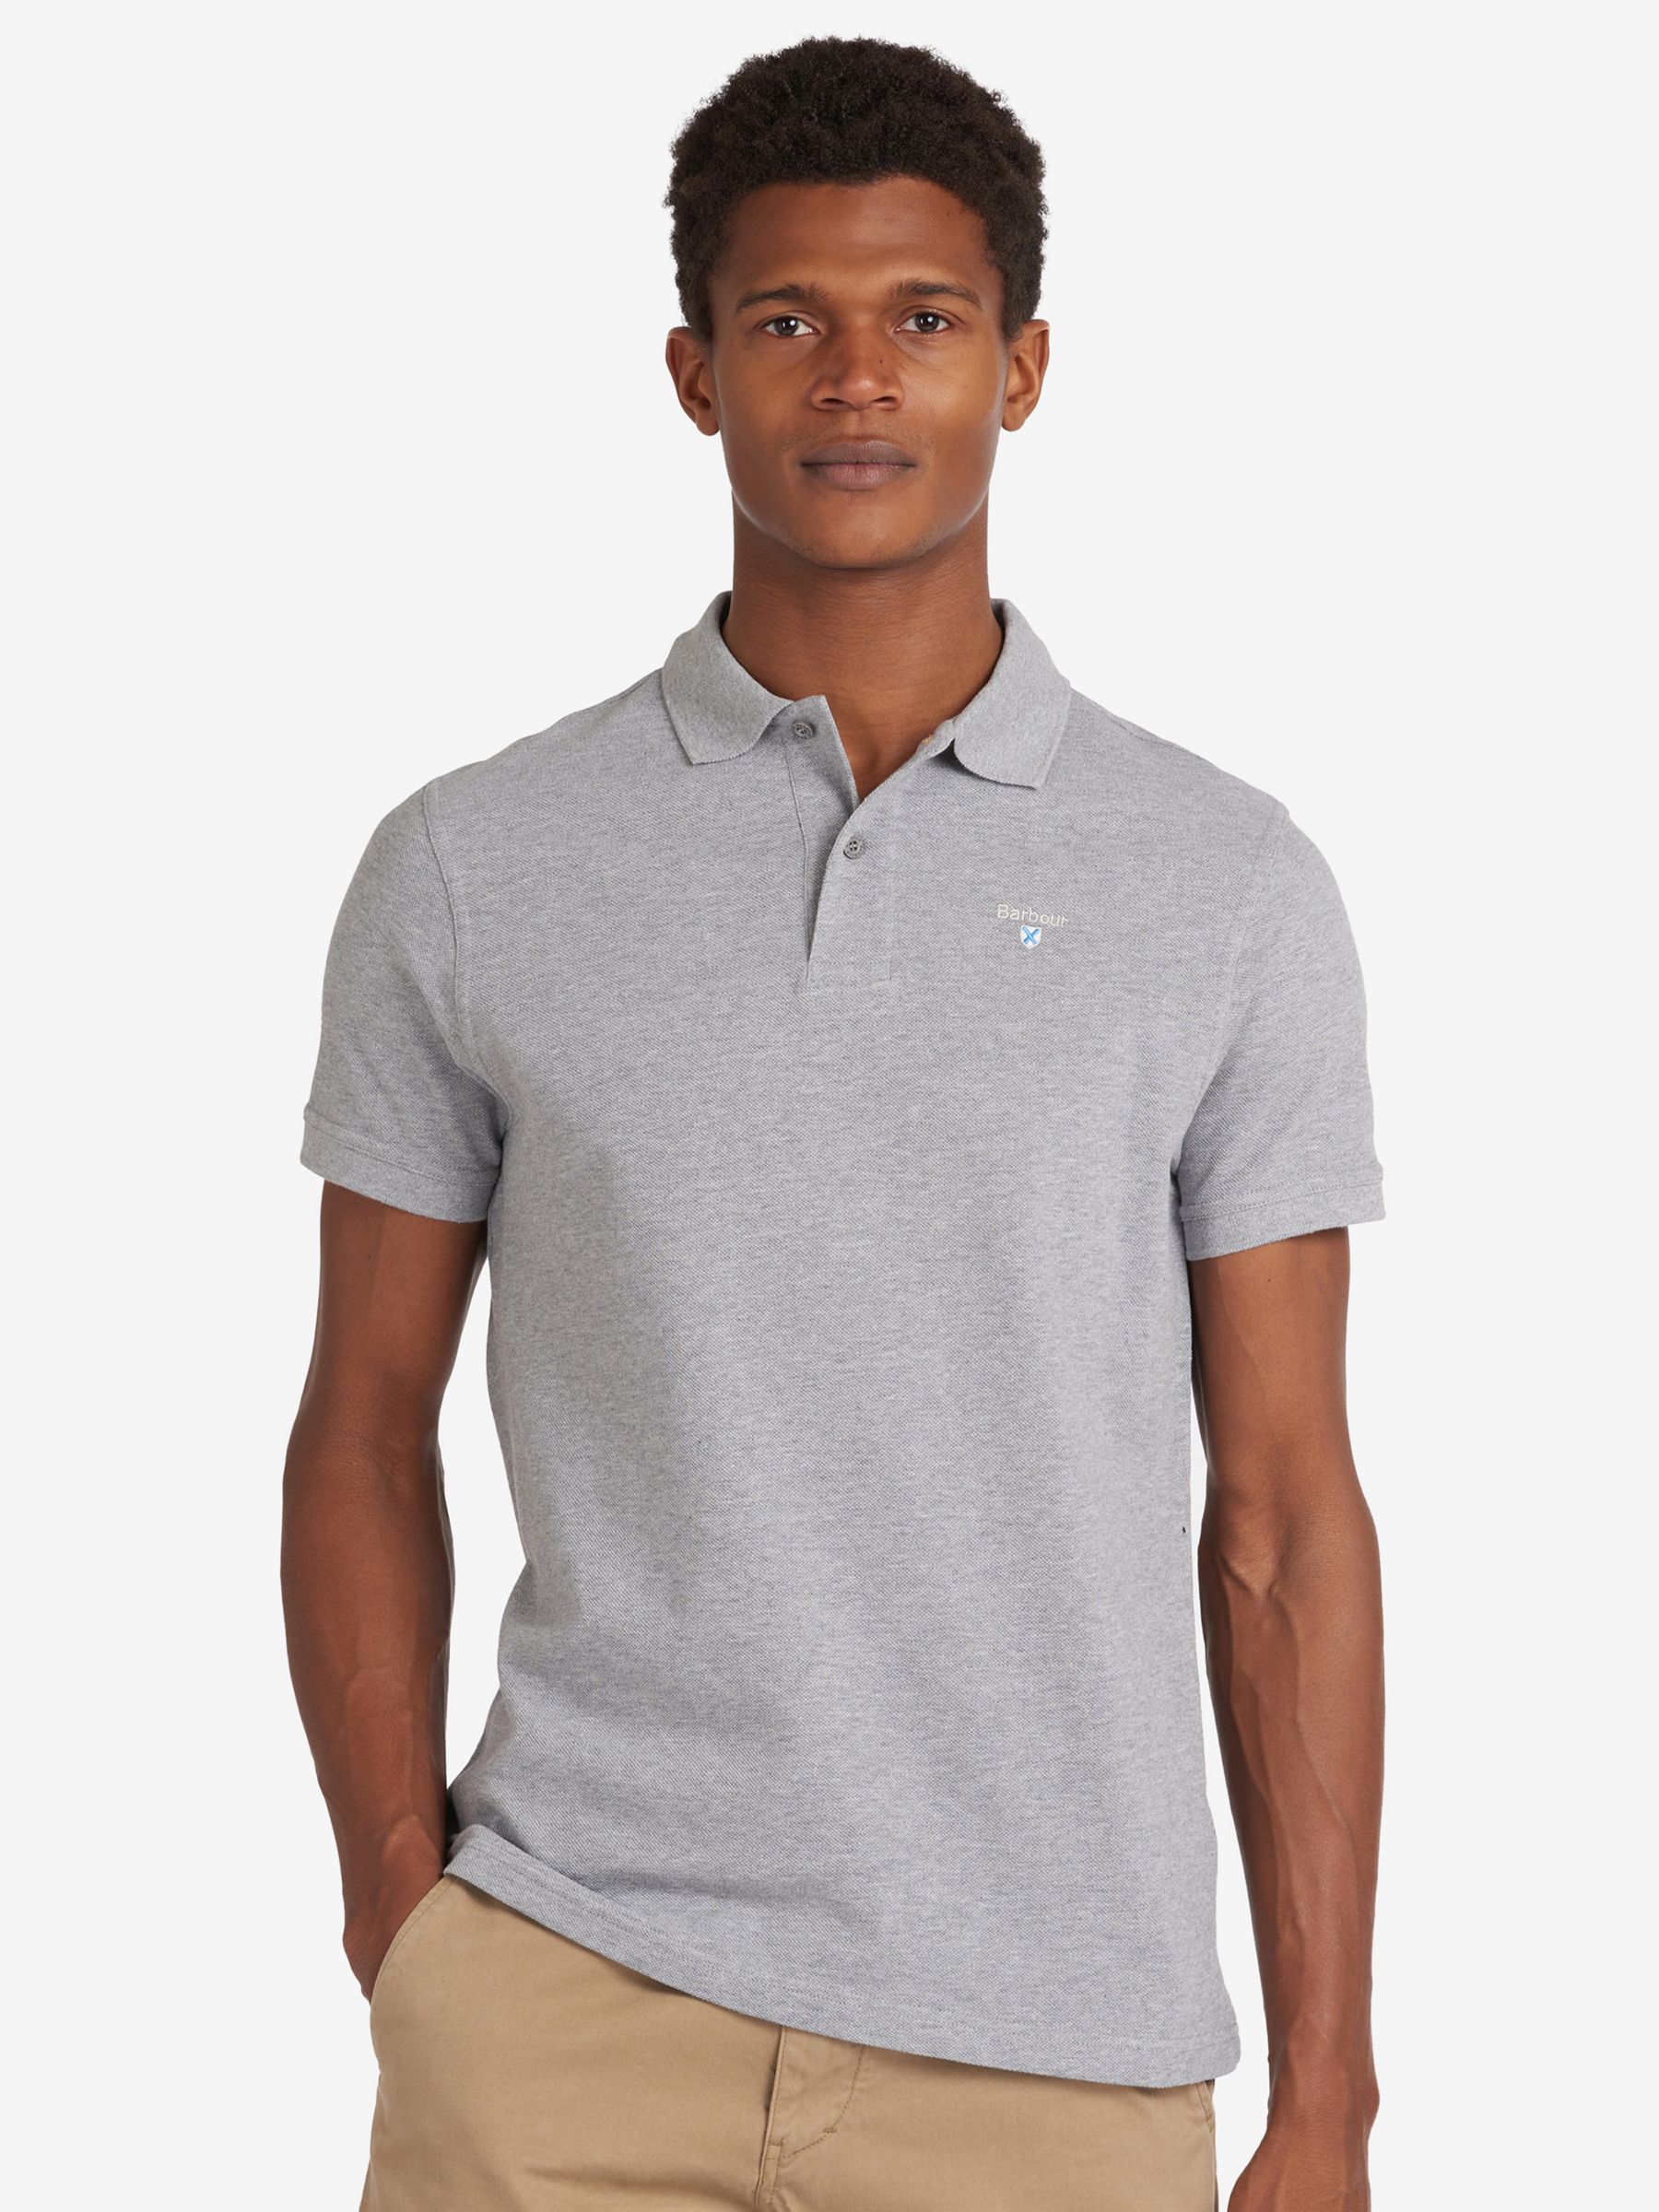 Barbour Short Sleeve Sports Polo Shirt, at John Lewis Partners